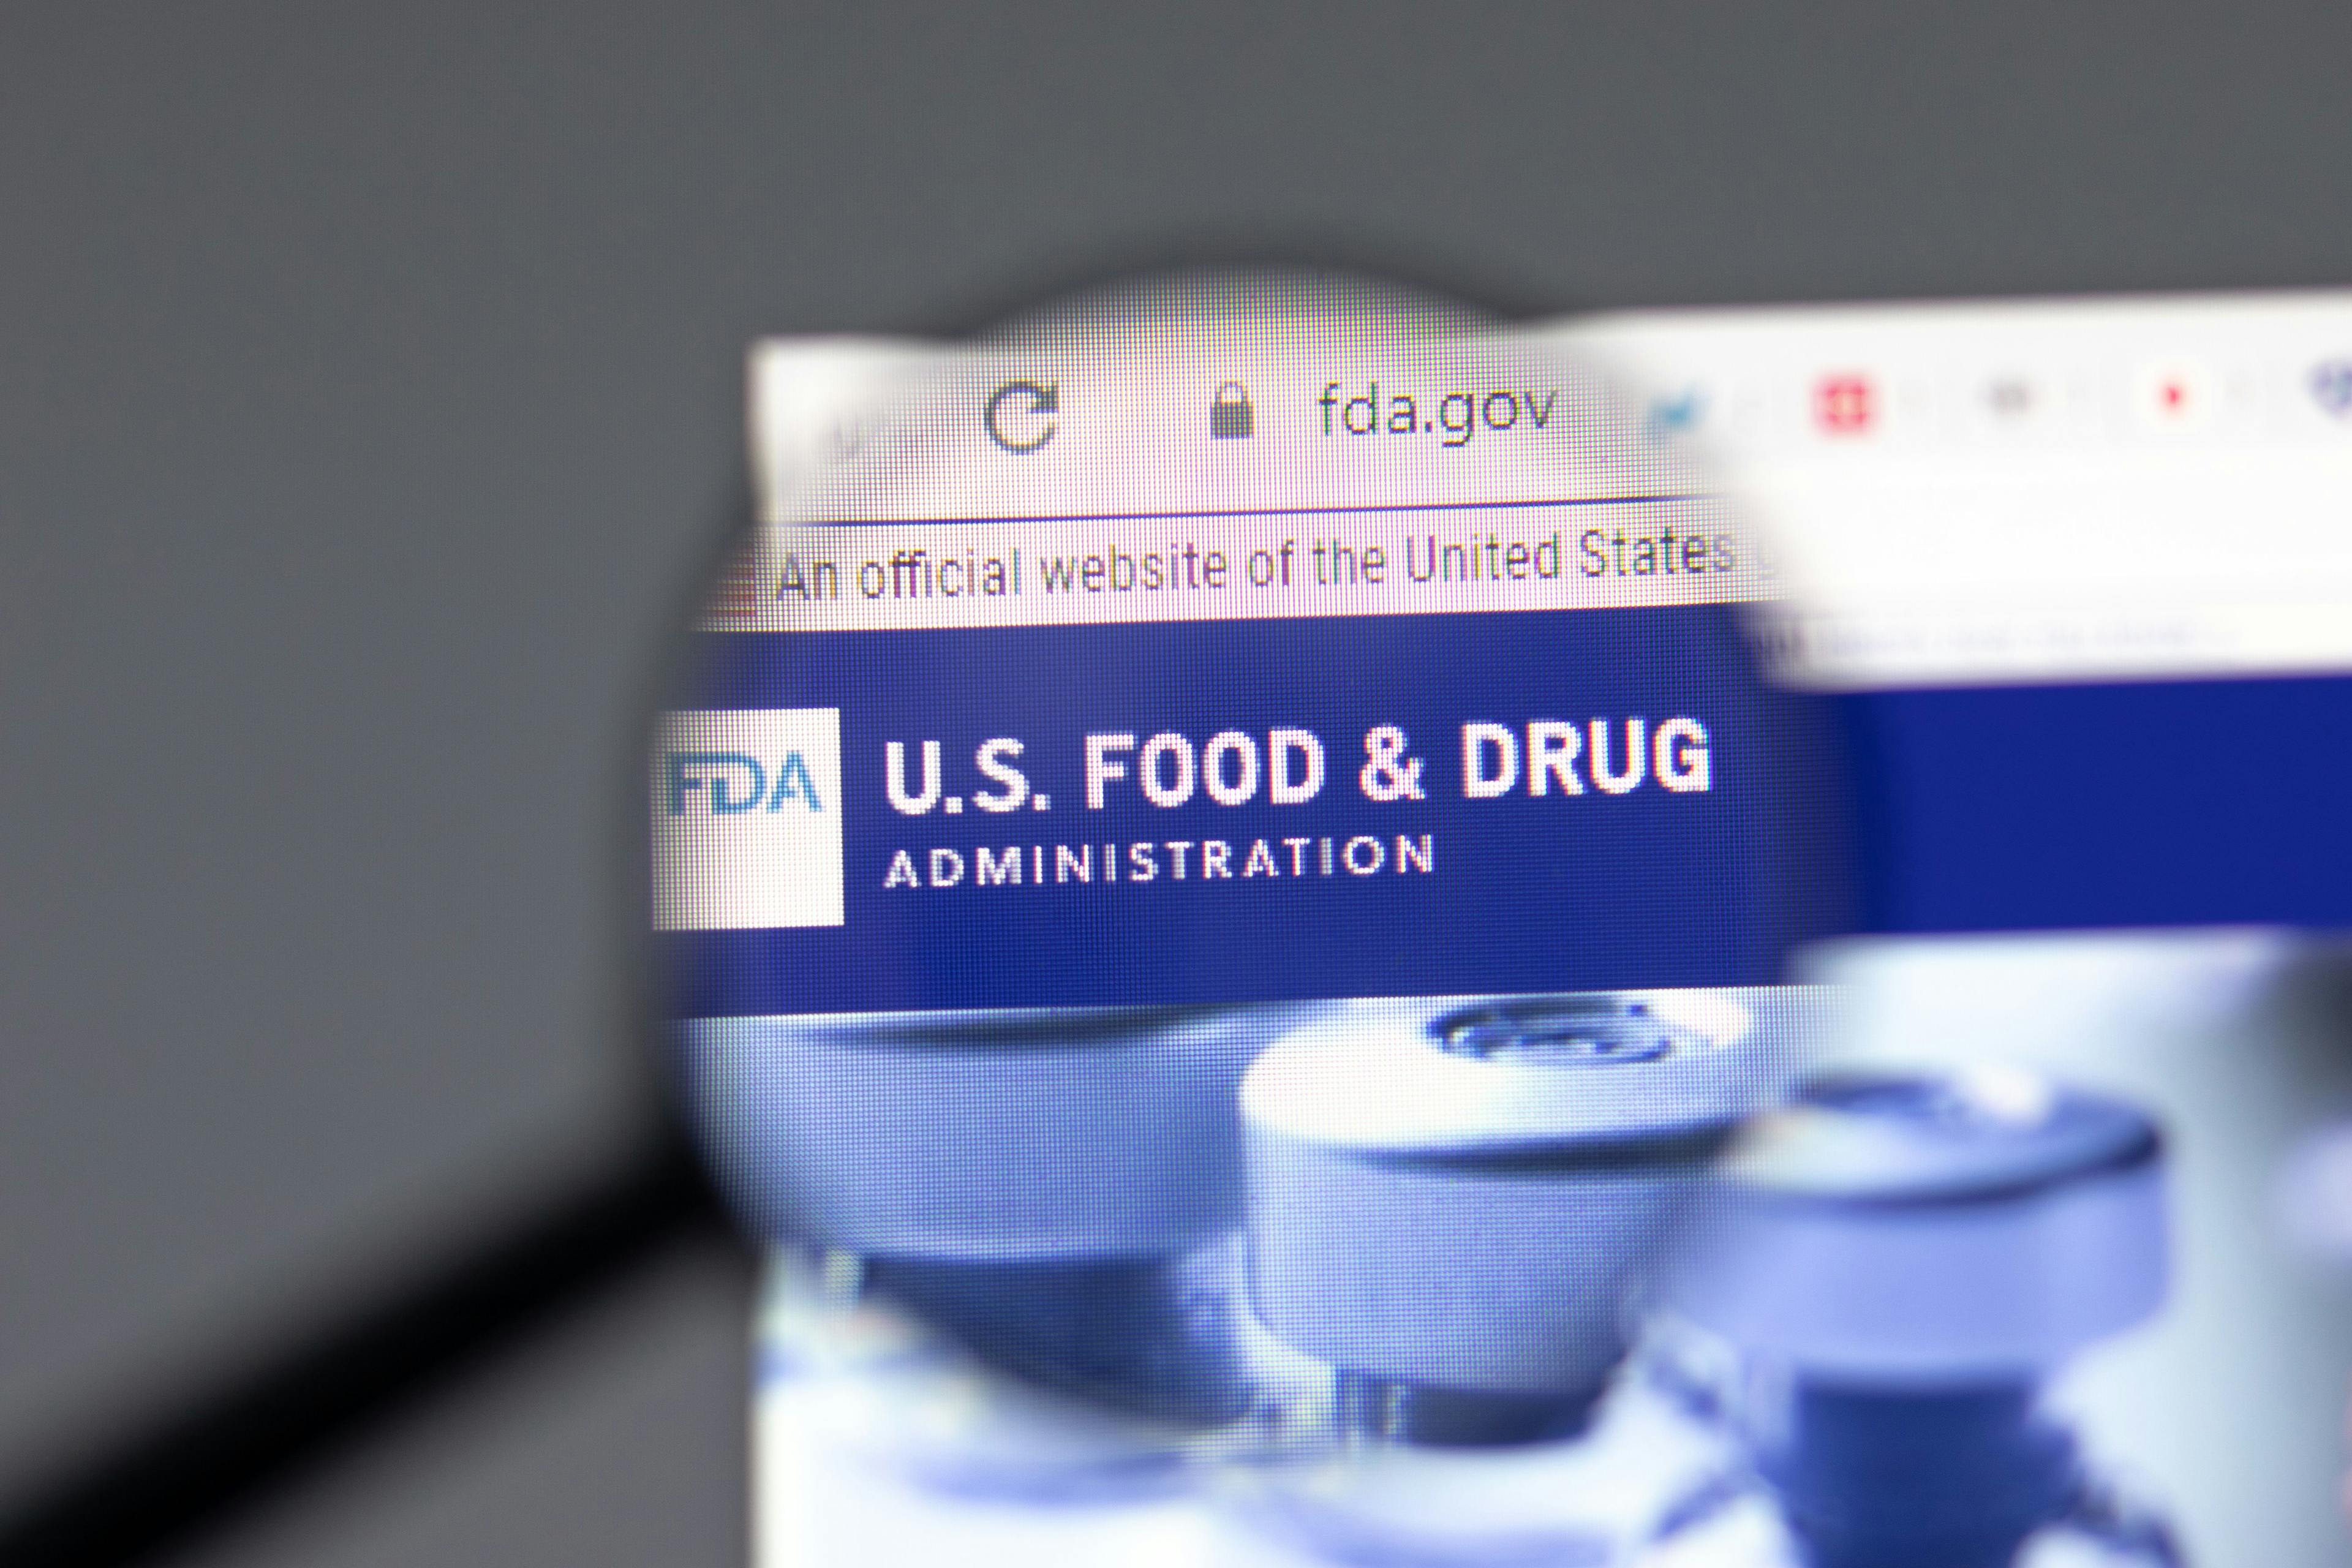 Brexpiprazole Plus Sertraline for PTSD Submitted to FDA for sNDA Review